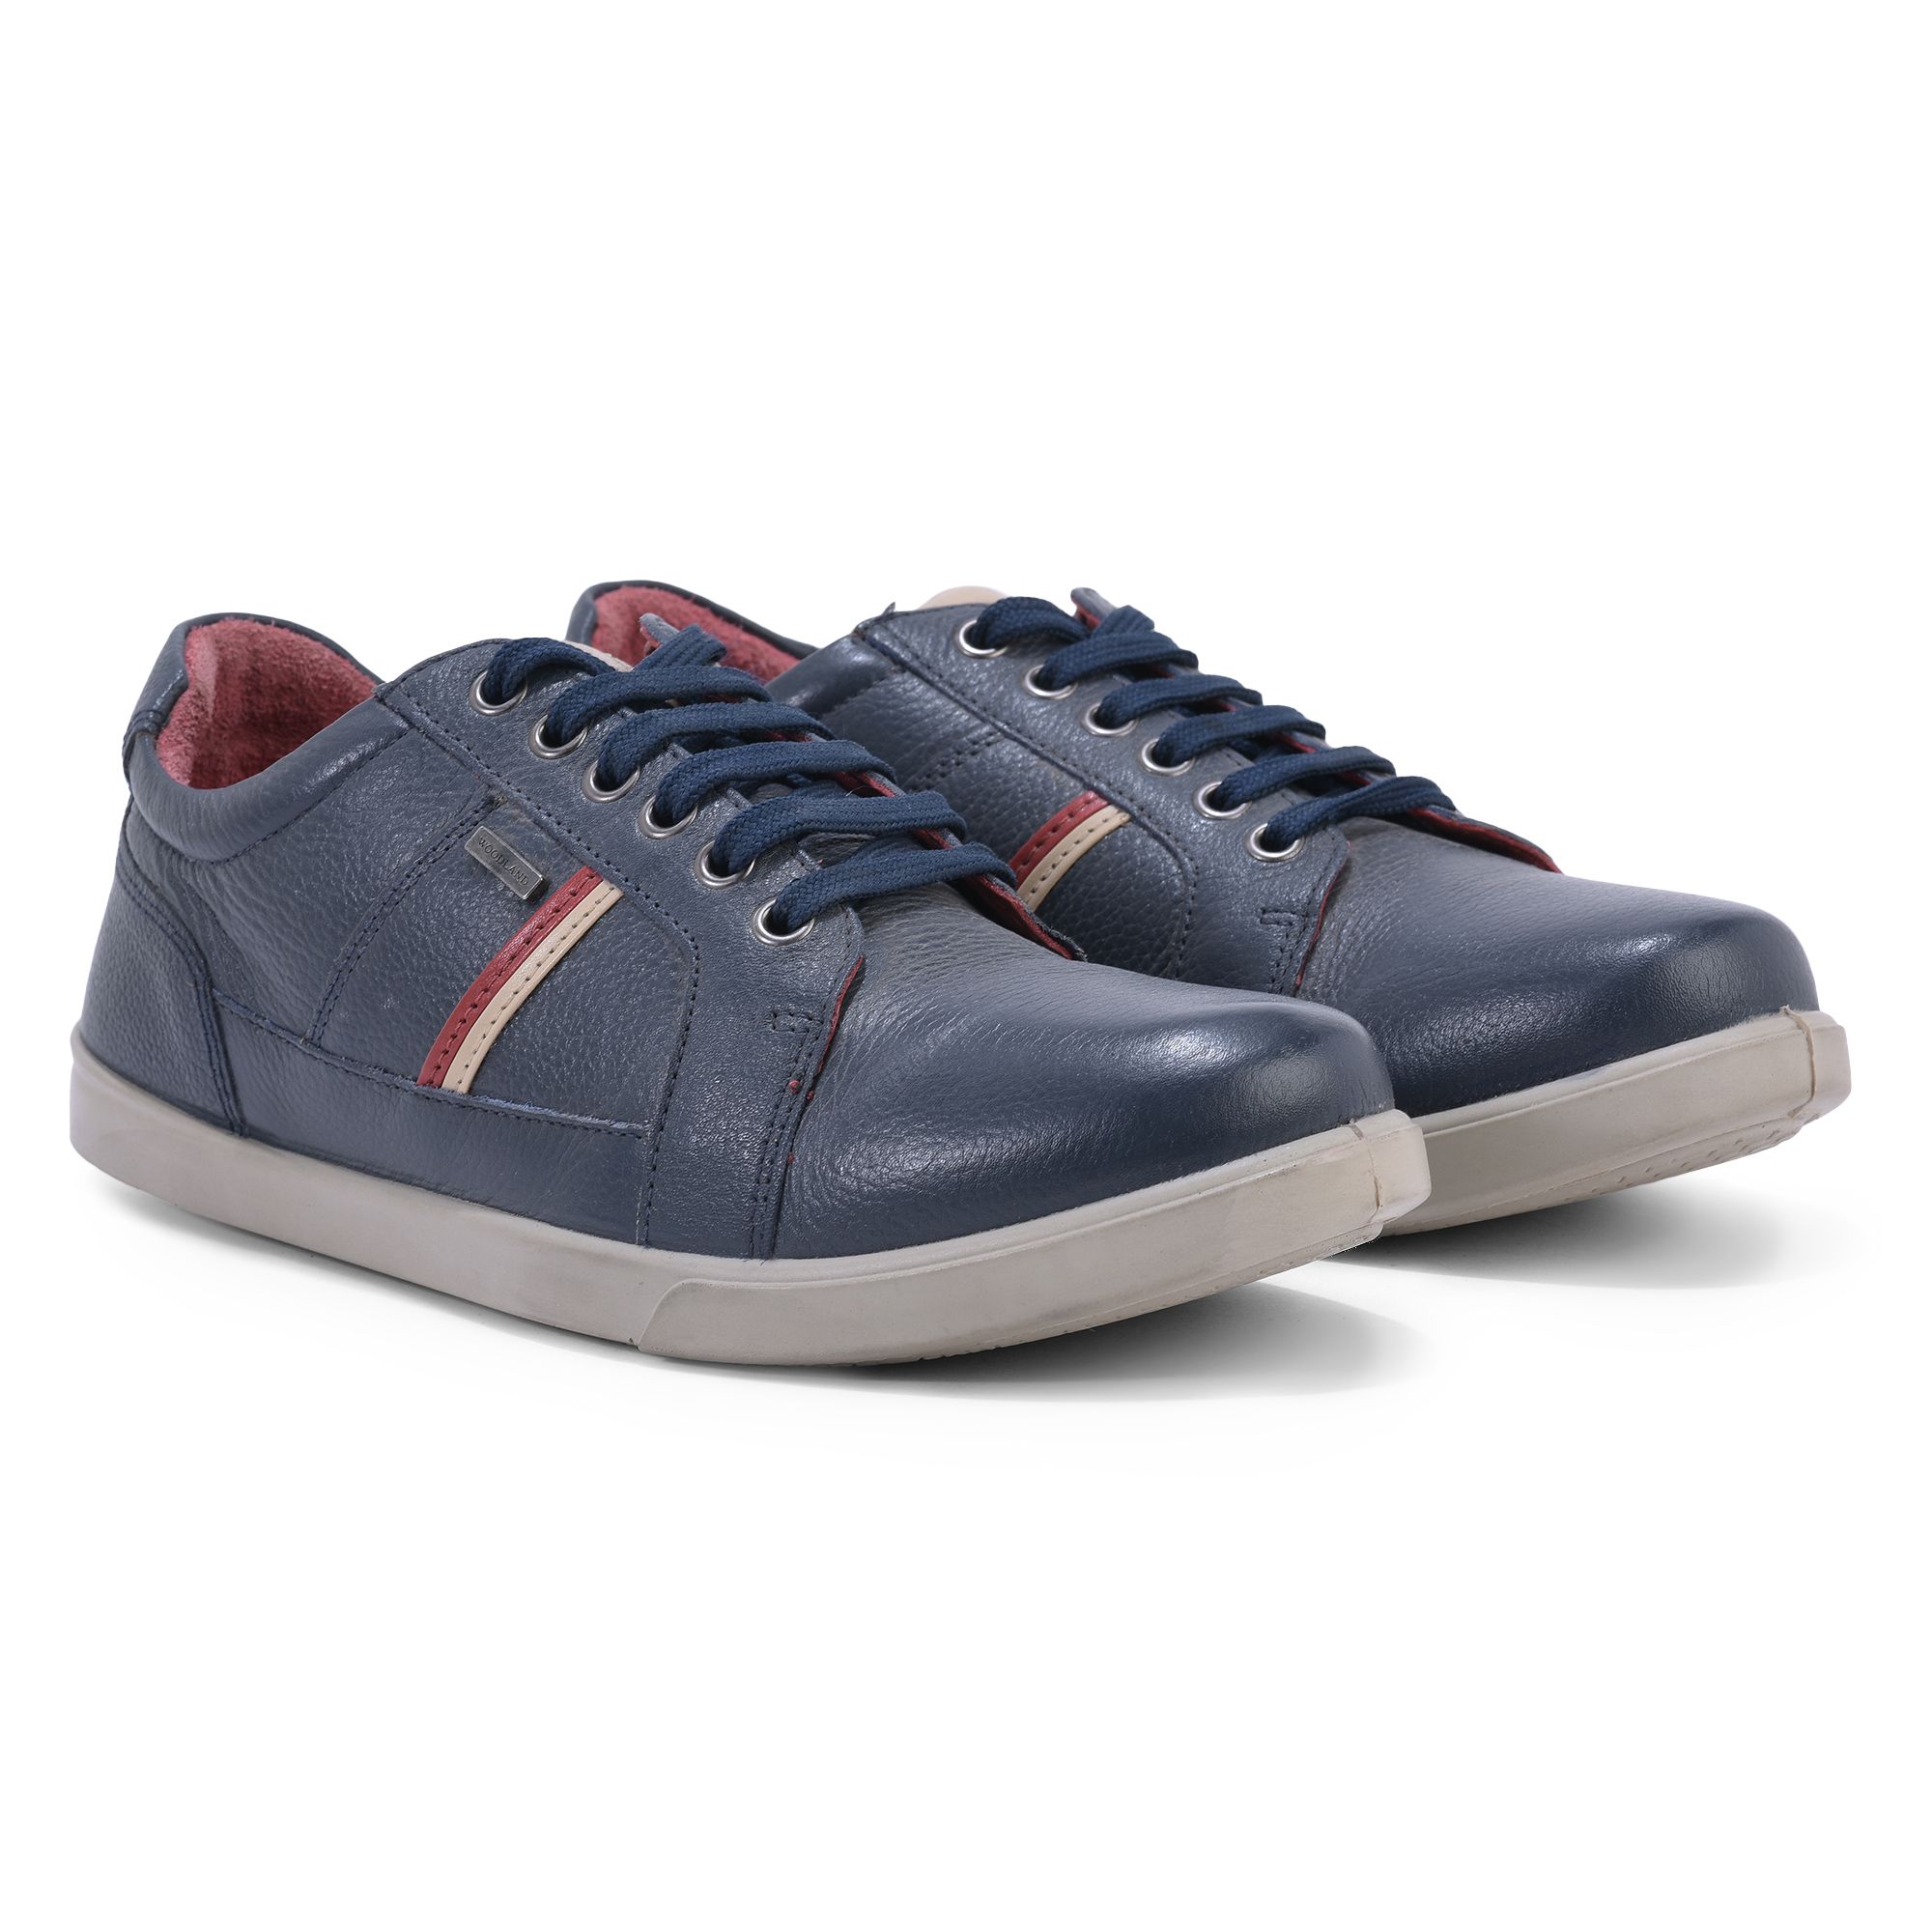 NAVY casual shoes